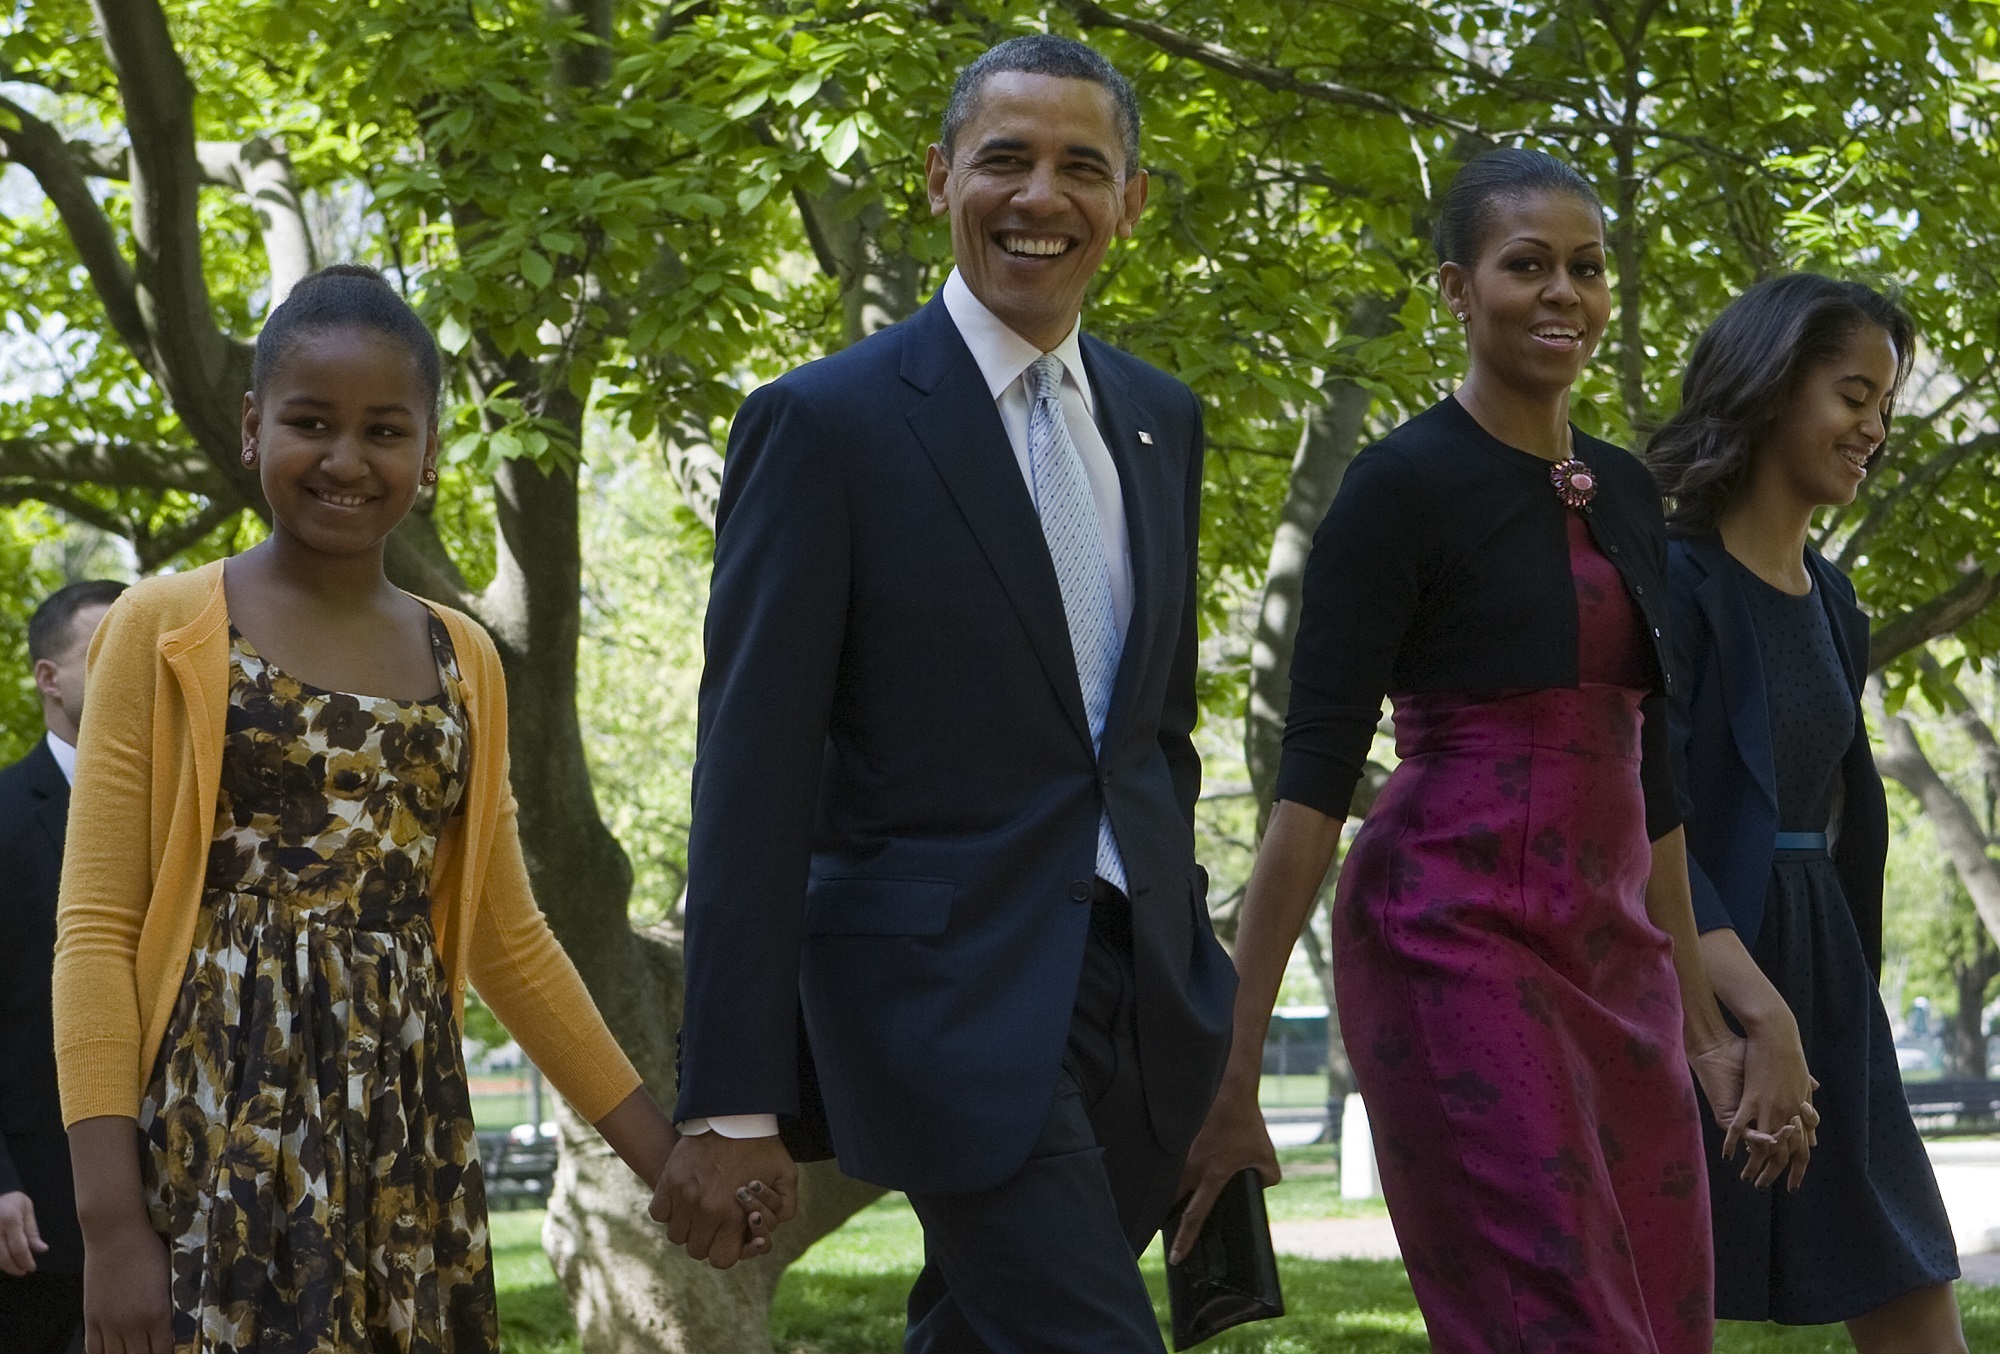 8 April 2012 - Washington, D.C. - President Barack Obama, First Lady Michelle Obama and daughters Sasha and Malia Obama walk across Lafayette Park to attend easter services at St. John's Episcopal Church. (Photo by Kristoffer Tripplaar/Pool/Corbis via Getty Images)